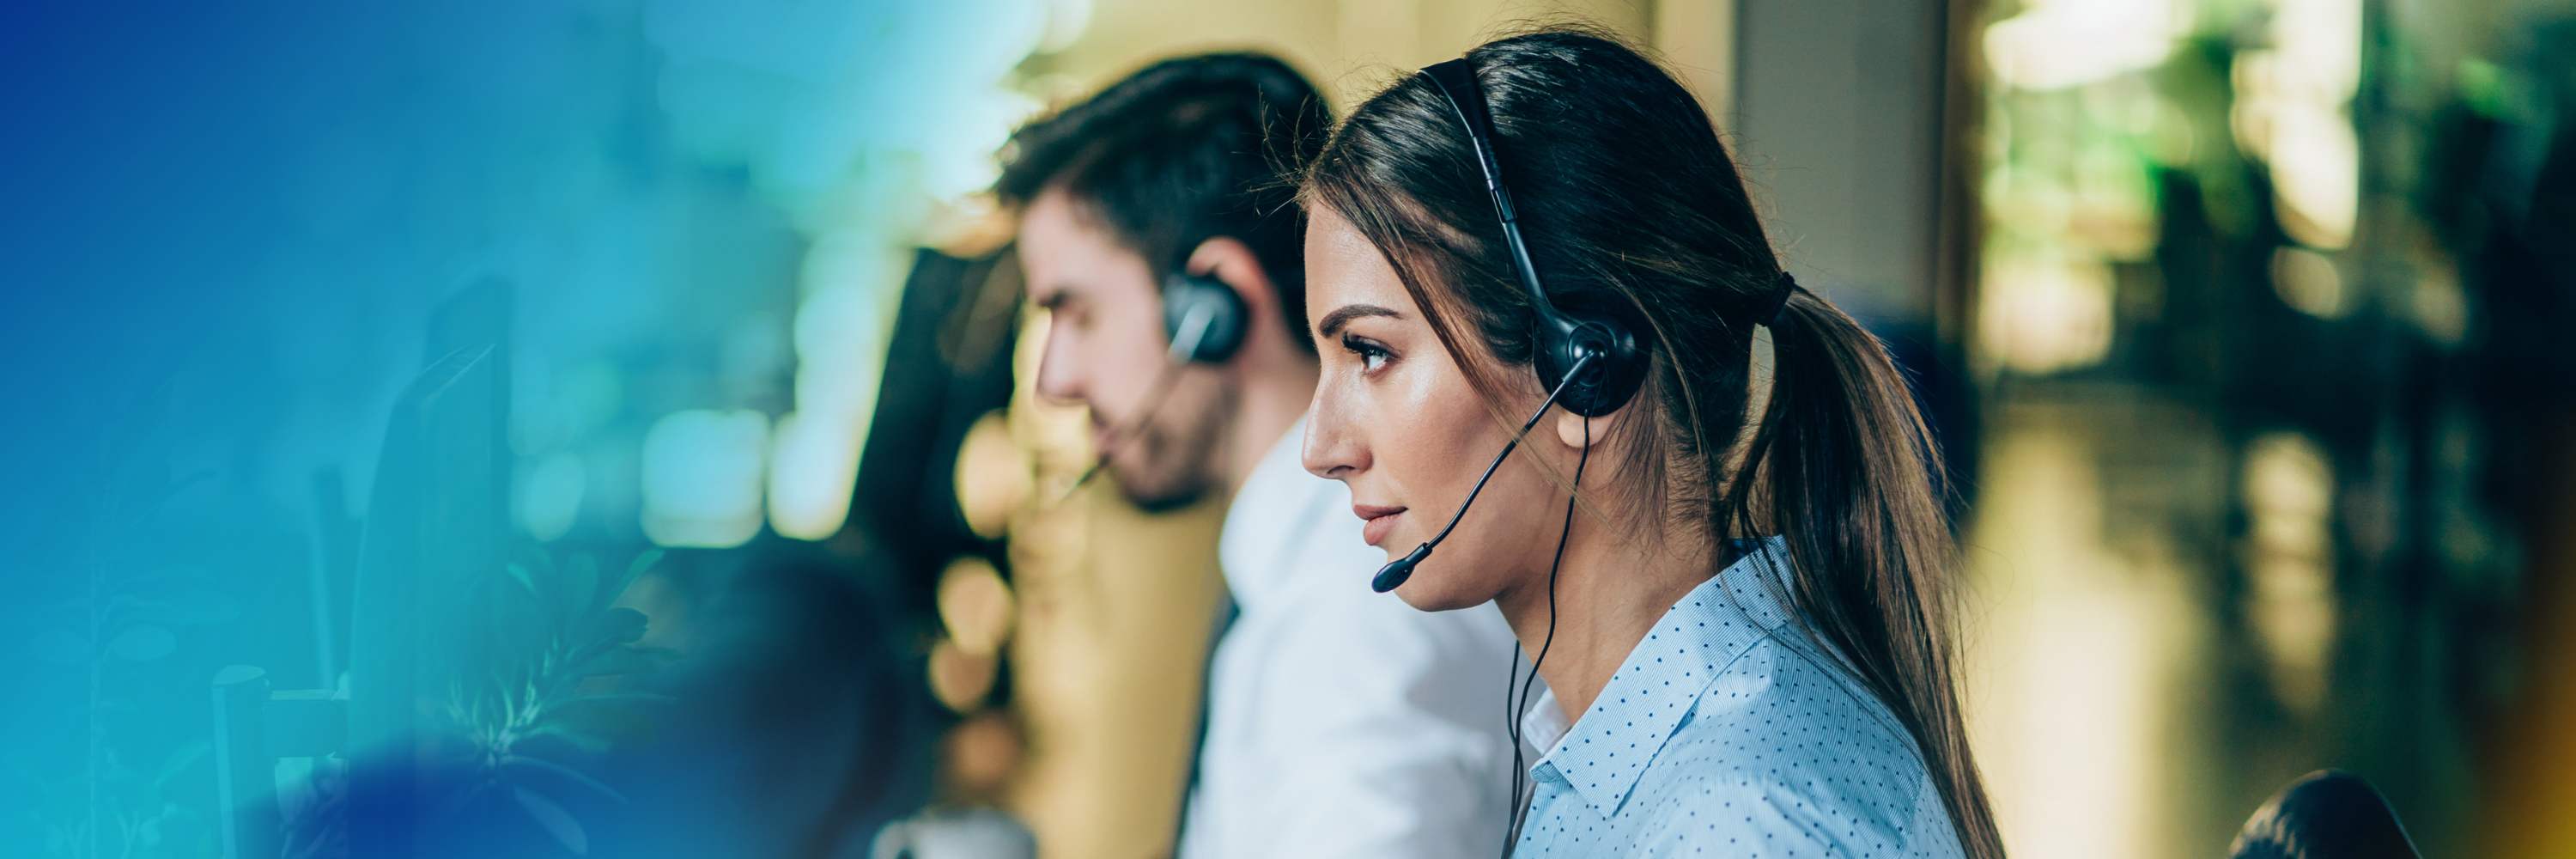 woman and man working in a call centre